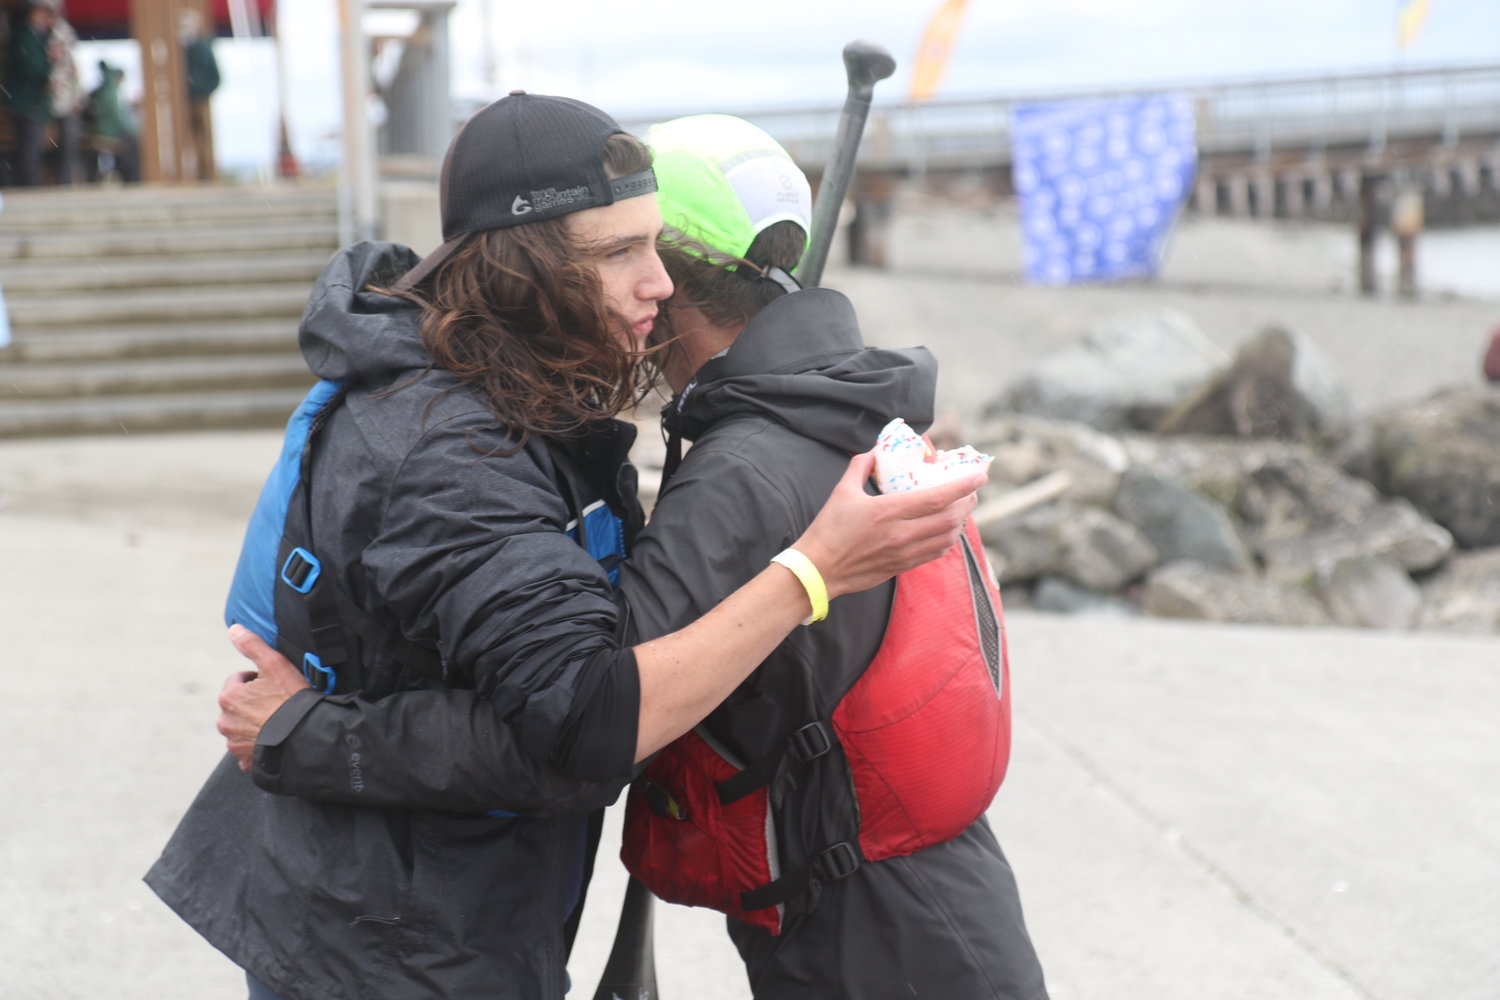 Owen and Brook Swanson hug, donuts in-hand, shortly after arriving at the Northwest Maritime Center and completing the 70-mile Seventy48 race.